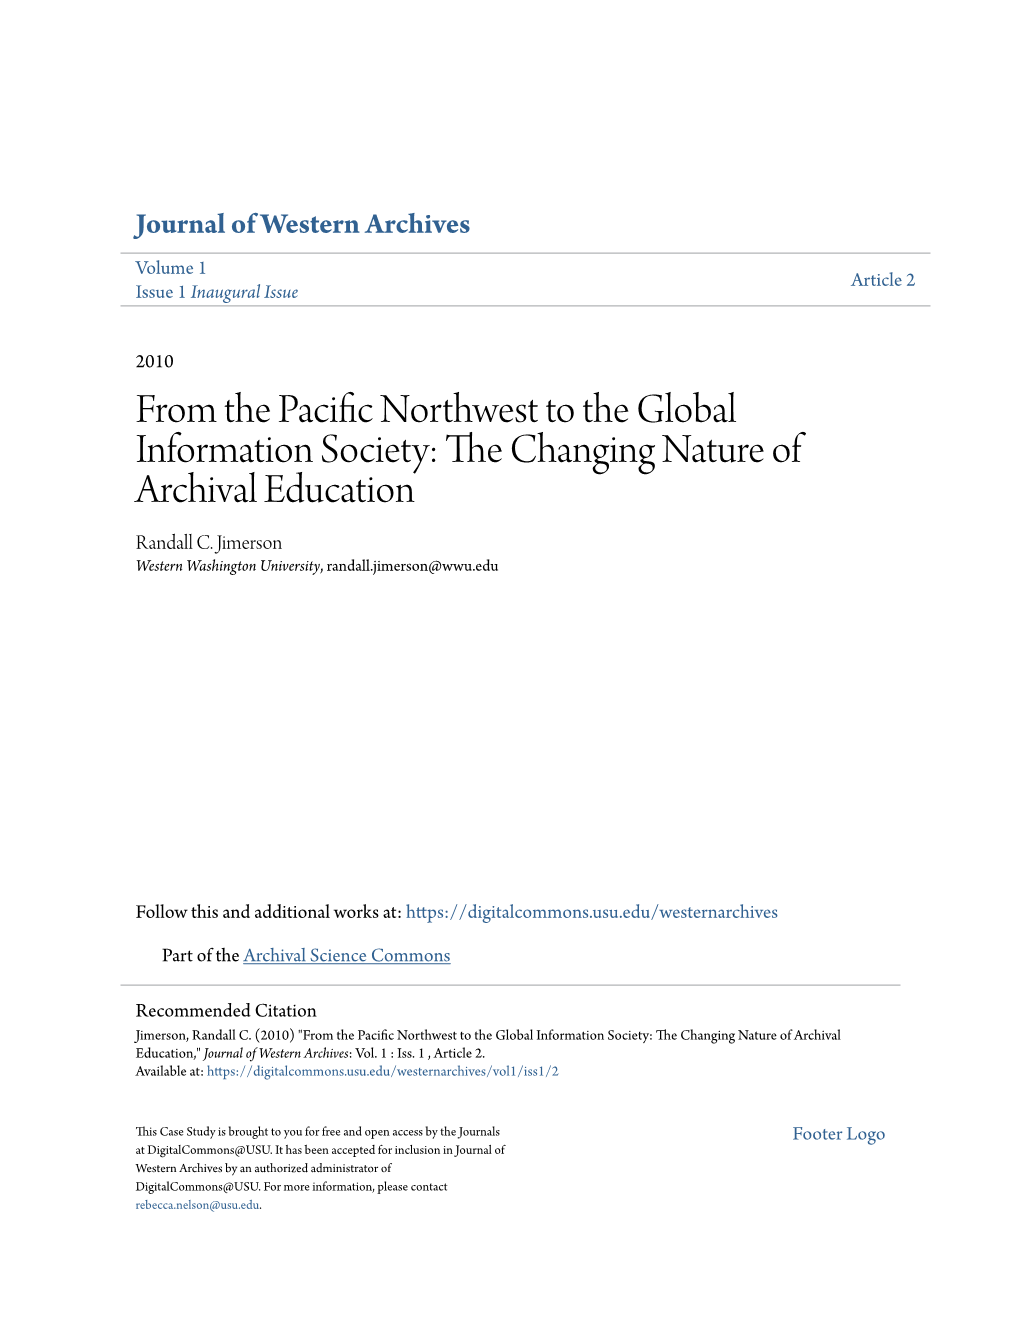 The Changing Nature of Archival Education